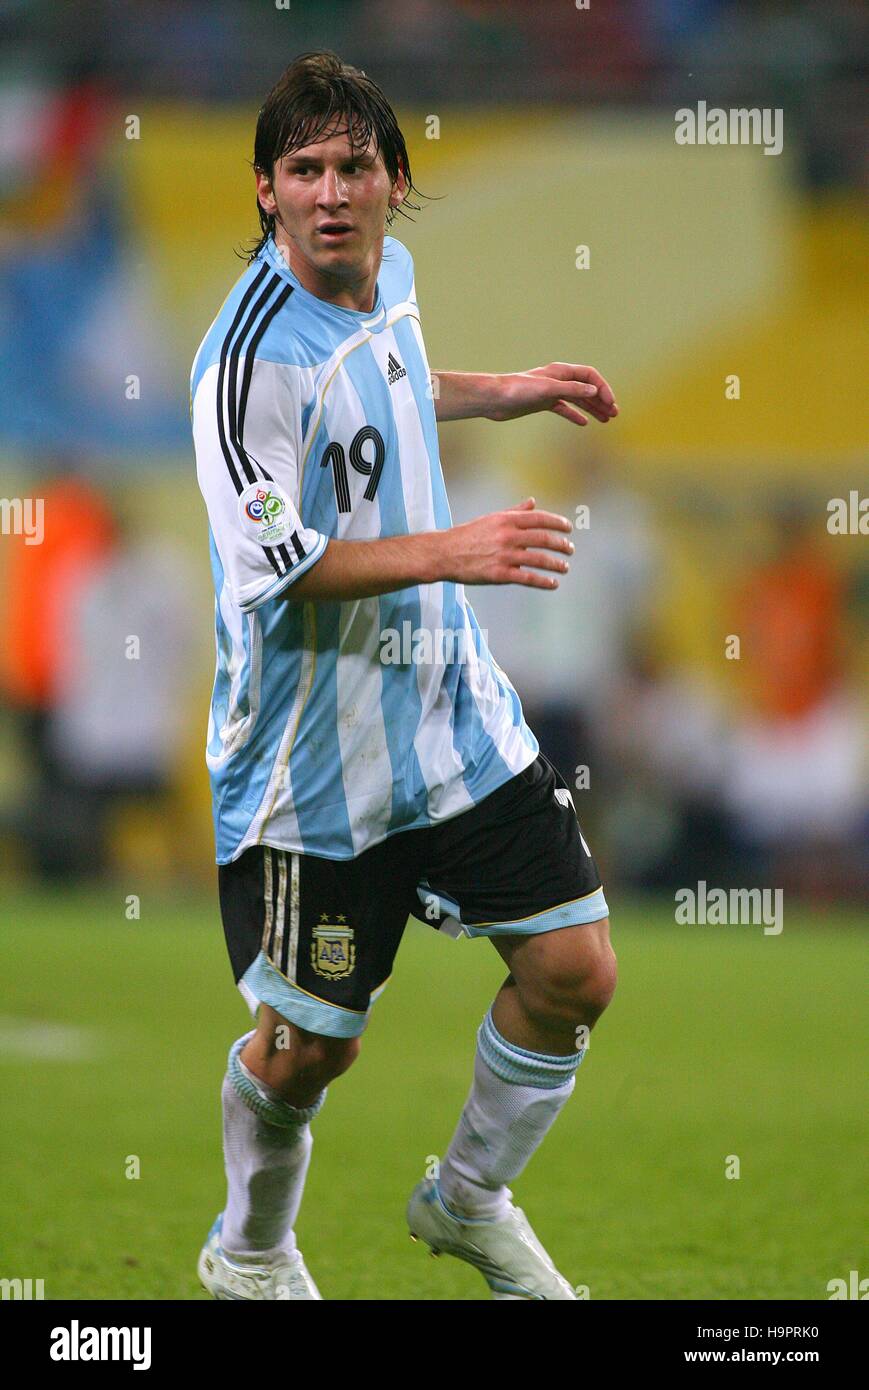 LIONEL MESSI ARGENTINA & BARCELONA WORLD CUP LEIPZIG GERMANY 24 June 2006  Stock Photo - Alamy